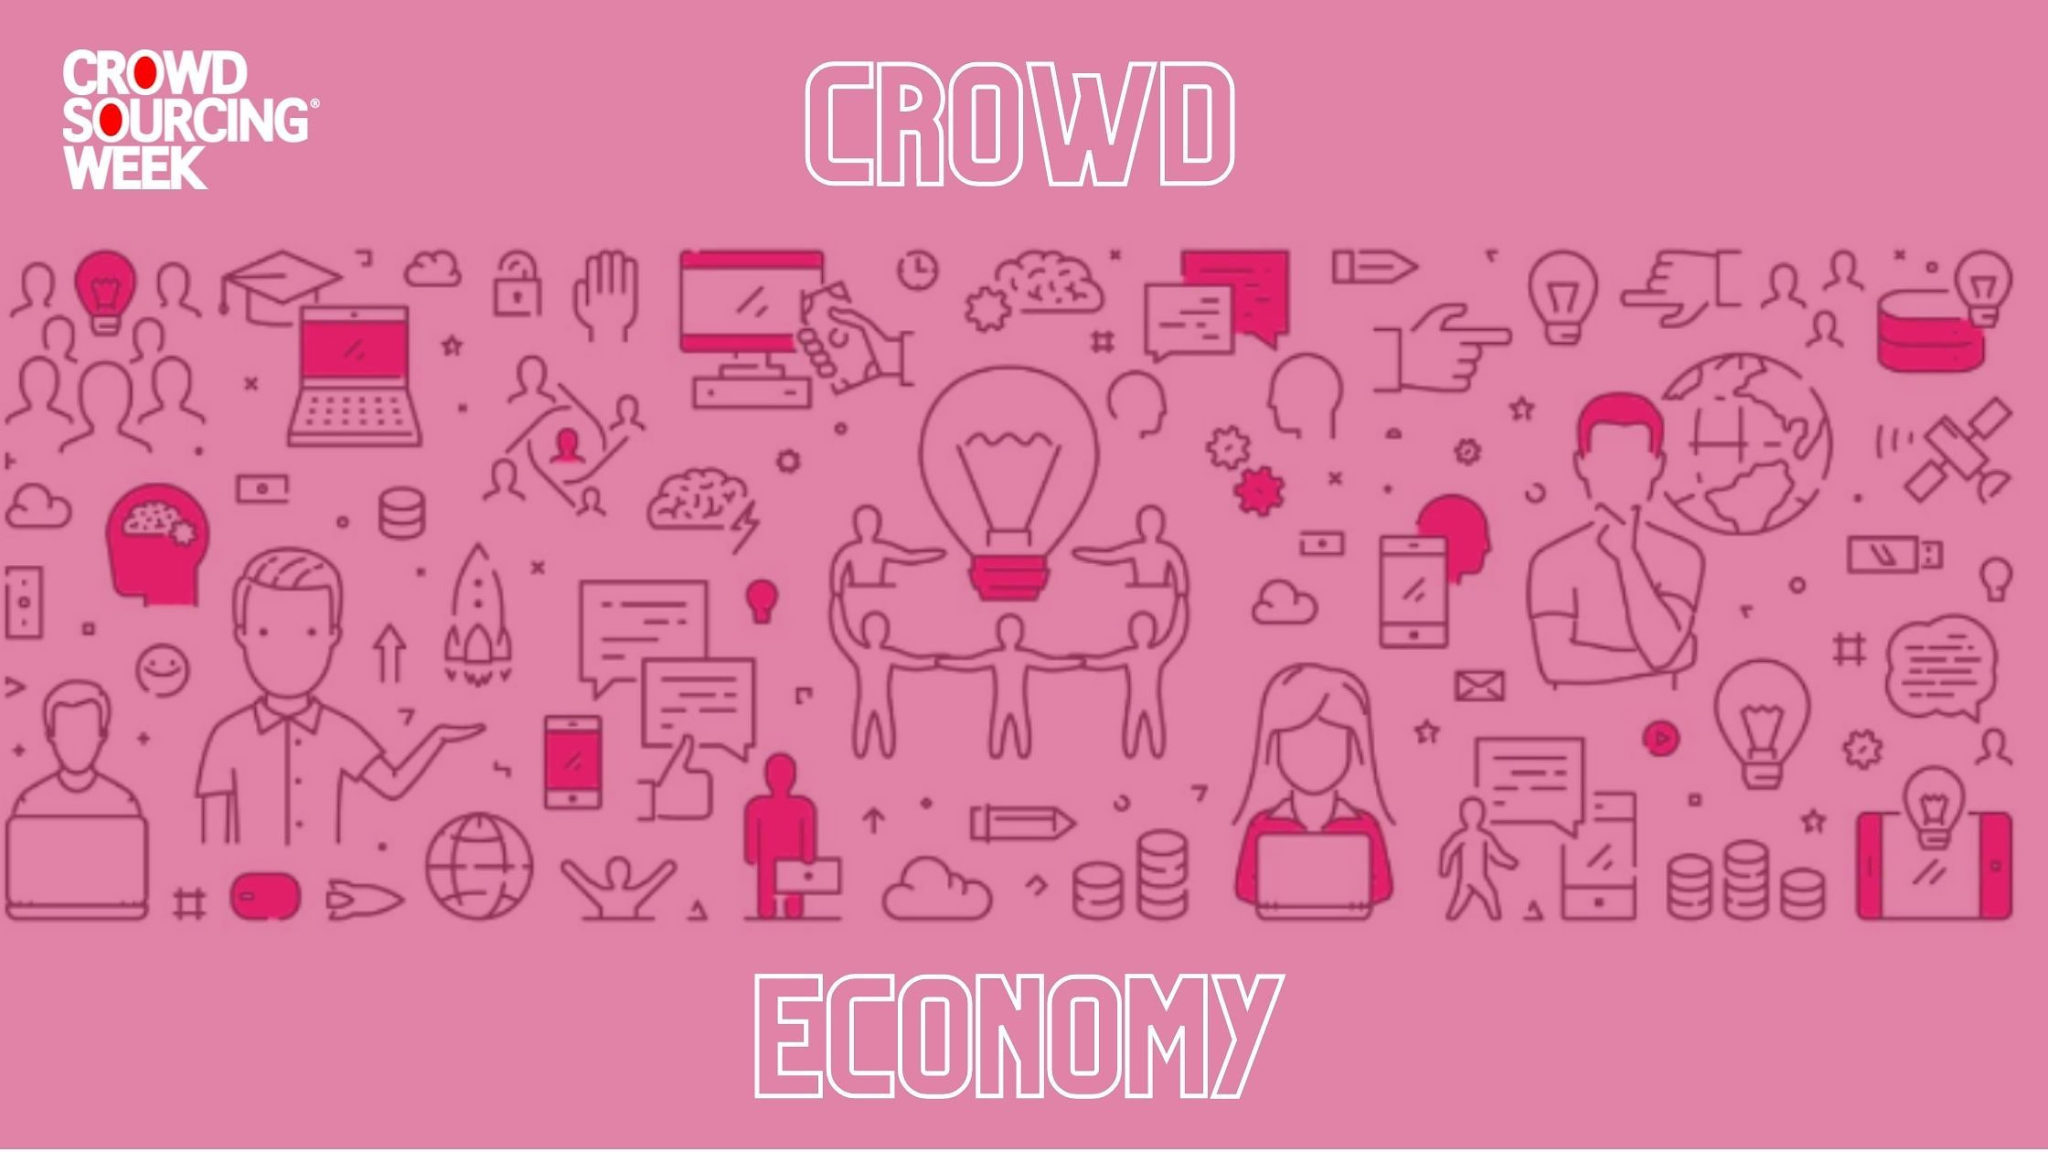 A #1 Business Model of the Decade: the Crowd Economy - Crowdsourcing Week